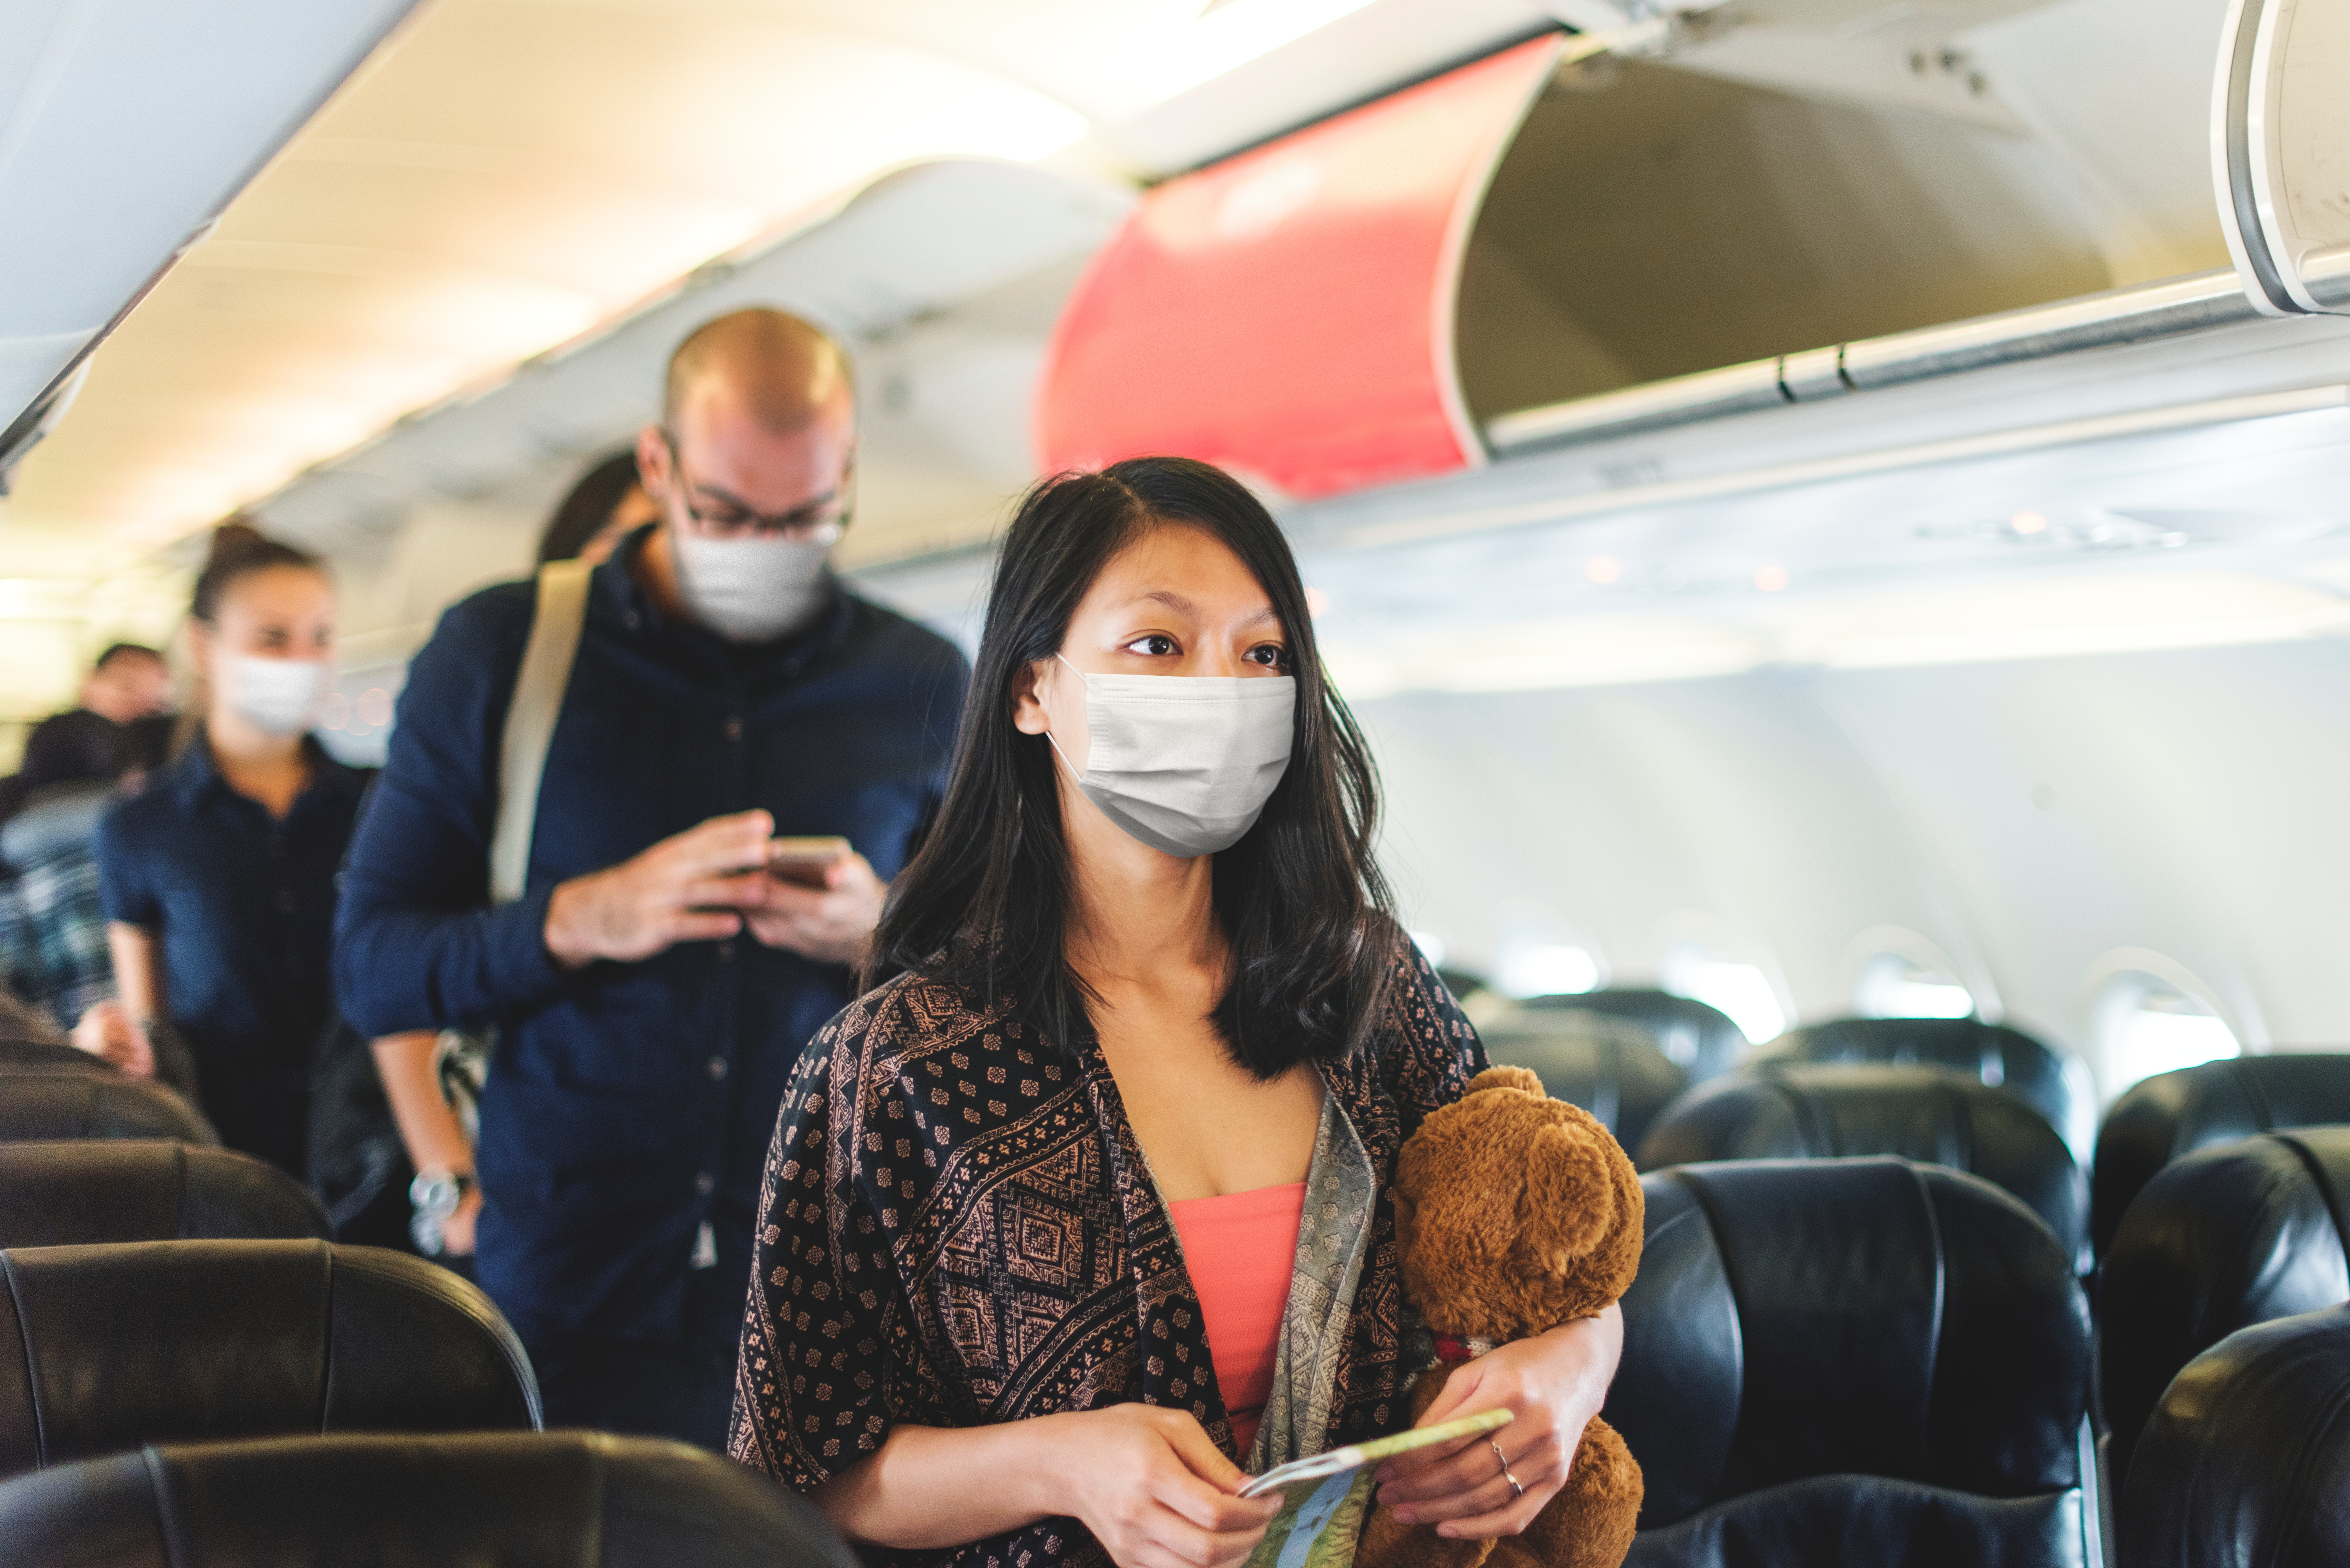 Following the Travel Mask Mandates: A Guide to Mask-Wearing in Transit